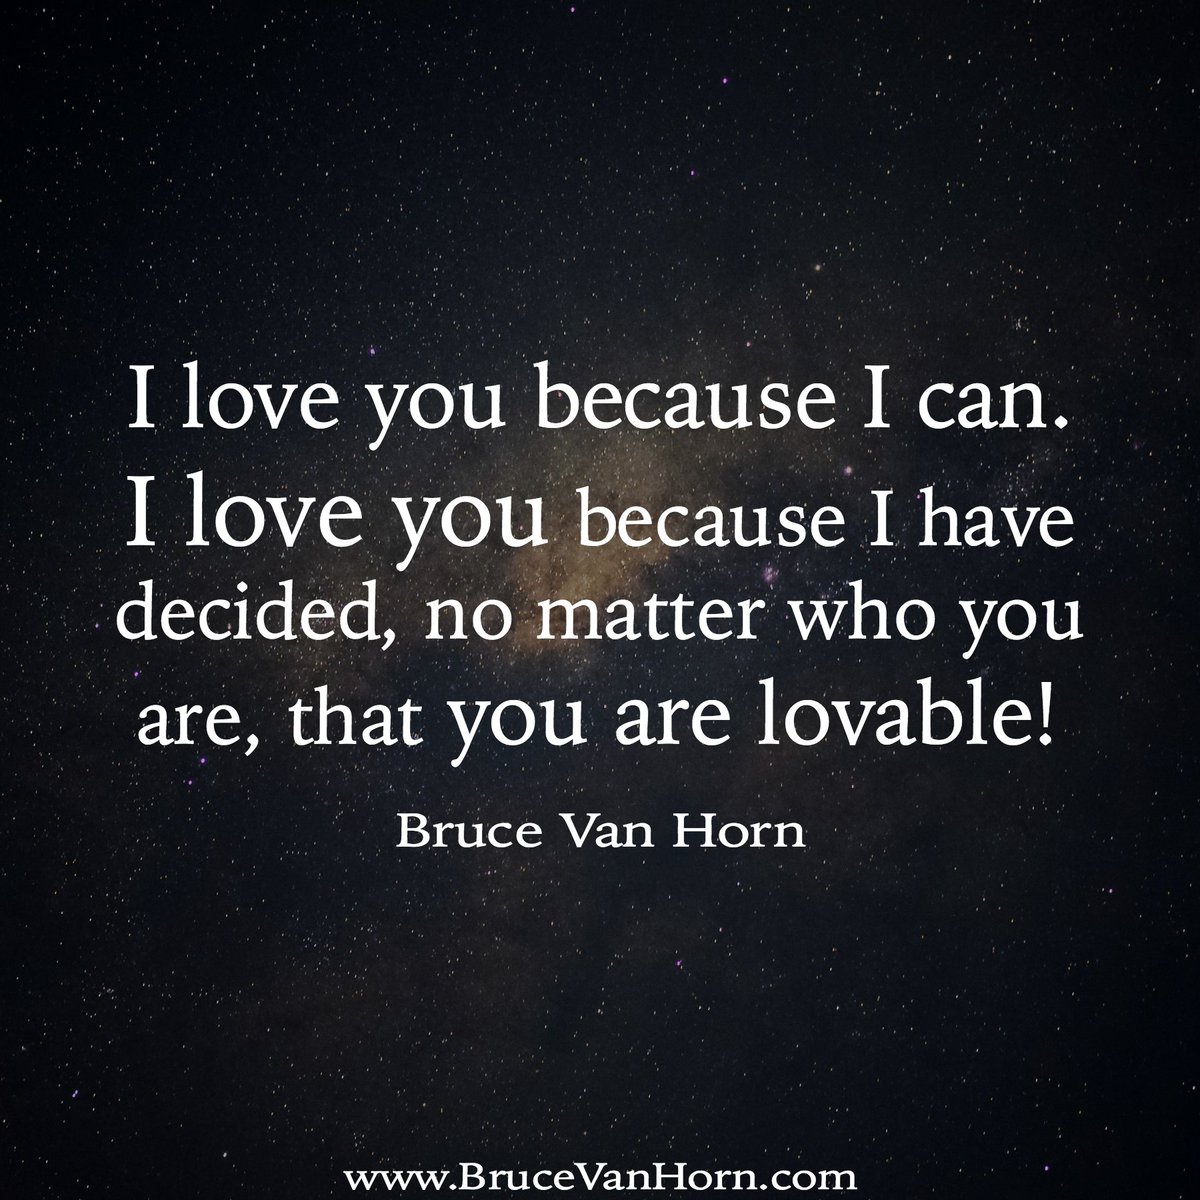 I love you because I can. I love you because I have decided, no matter who you are, that you are lovable!